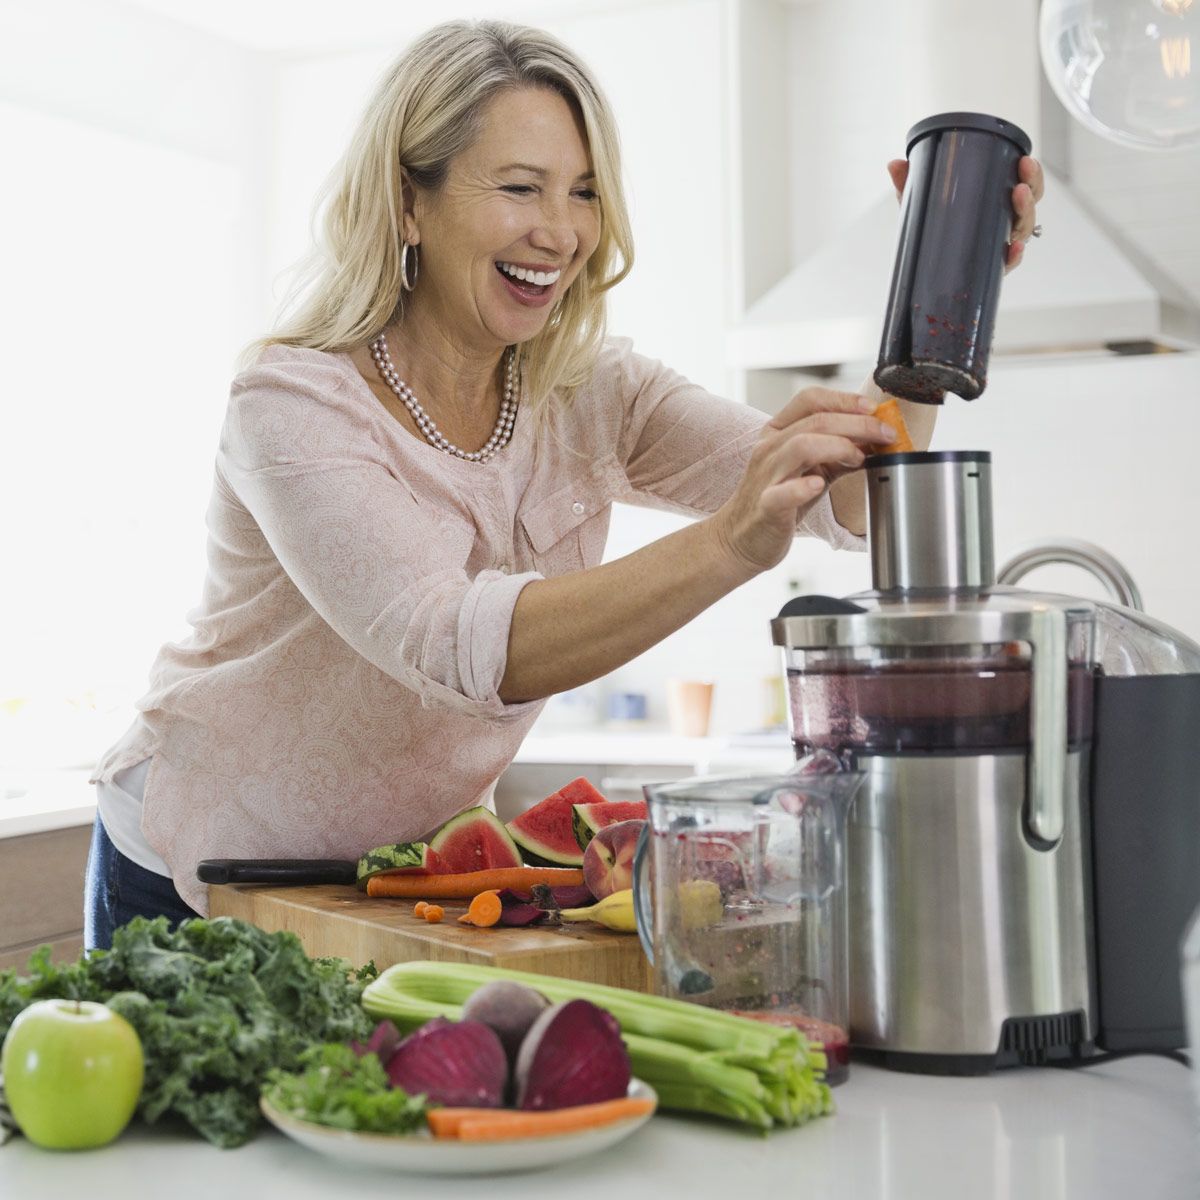 is-using-a-juicer-good-for-you